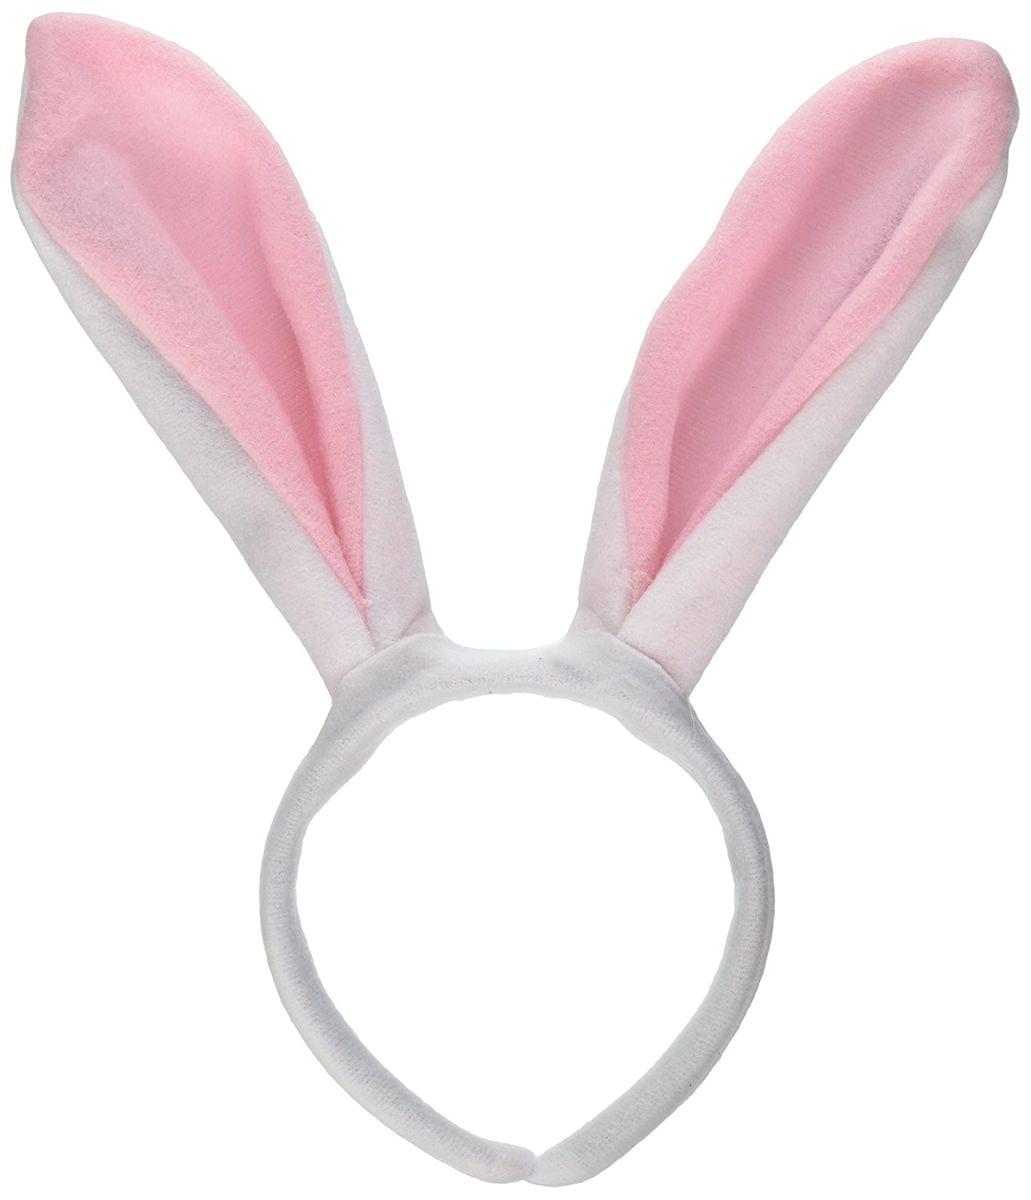 Bunny Ears White W Pink Lining